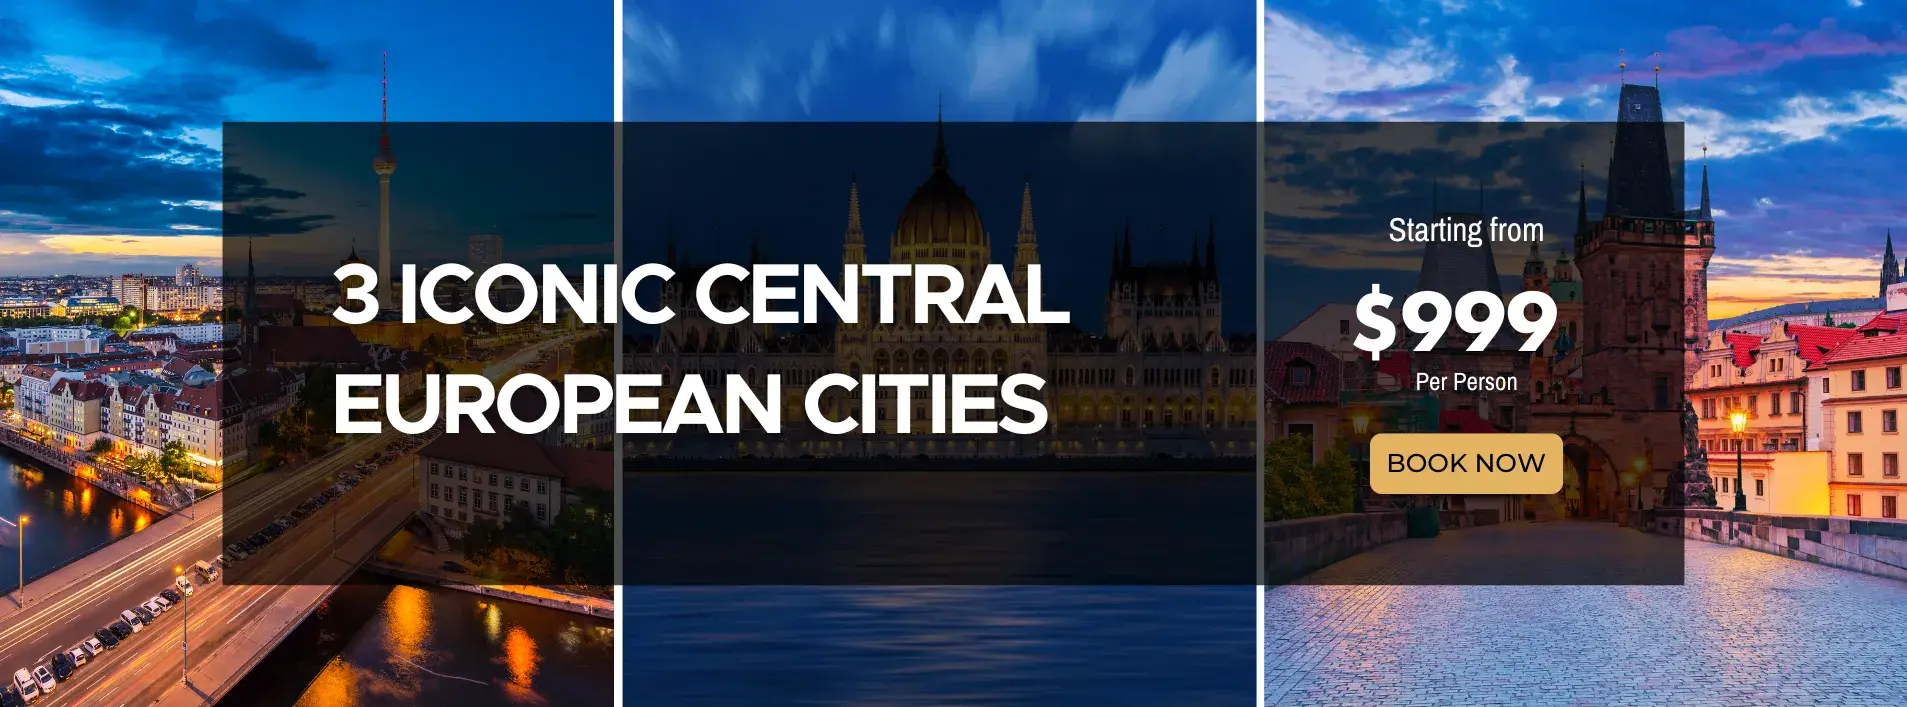 3 Iconic Central European Cities W/Air and Tours